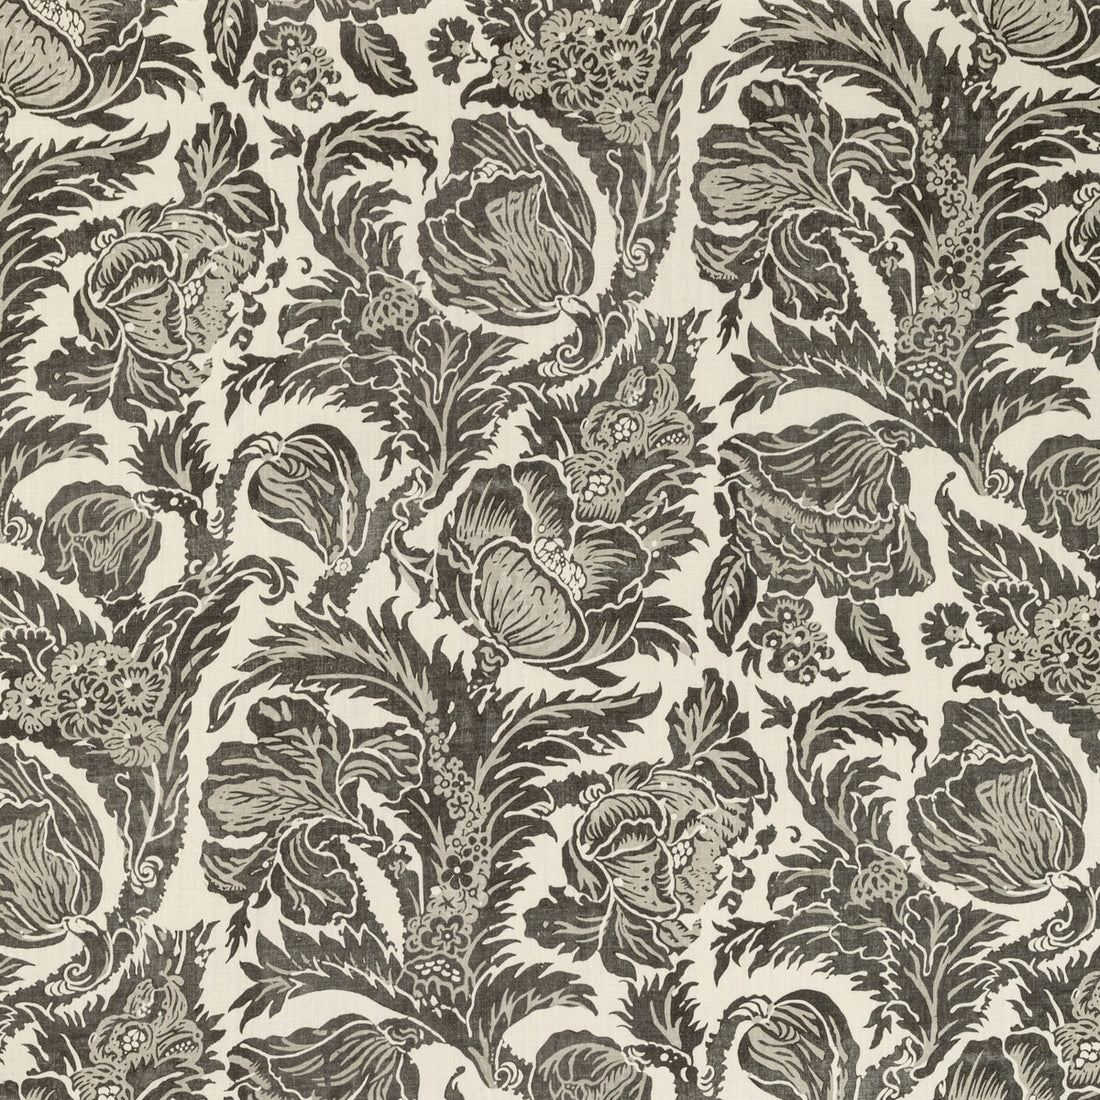 Marion Print fabric in smoke color - pattern 2020205.621.0 - by Lee Jofa in the Breckenridge collection